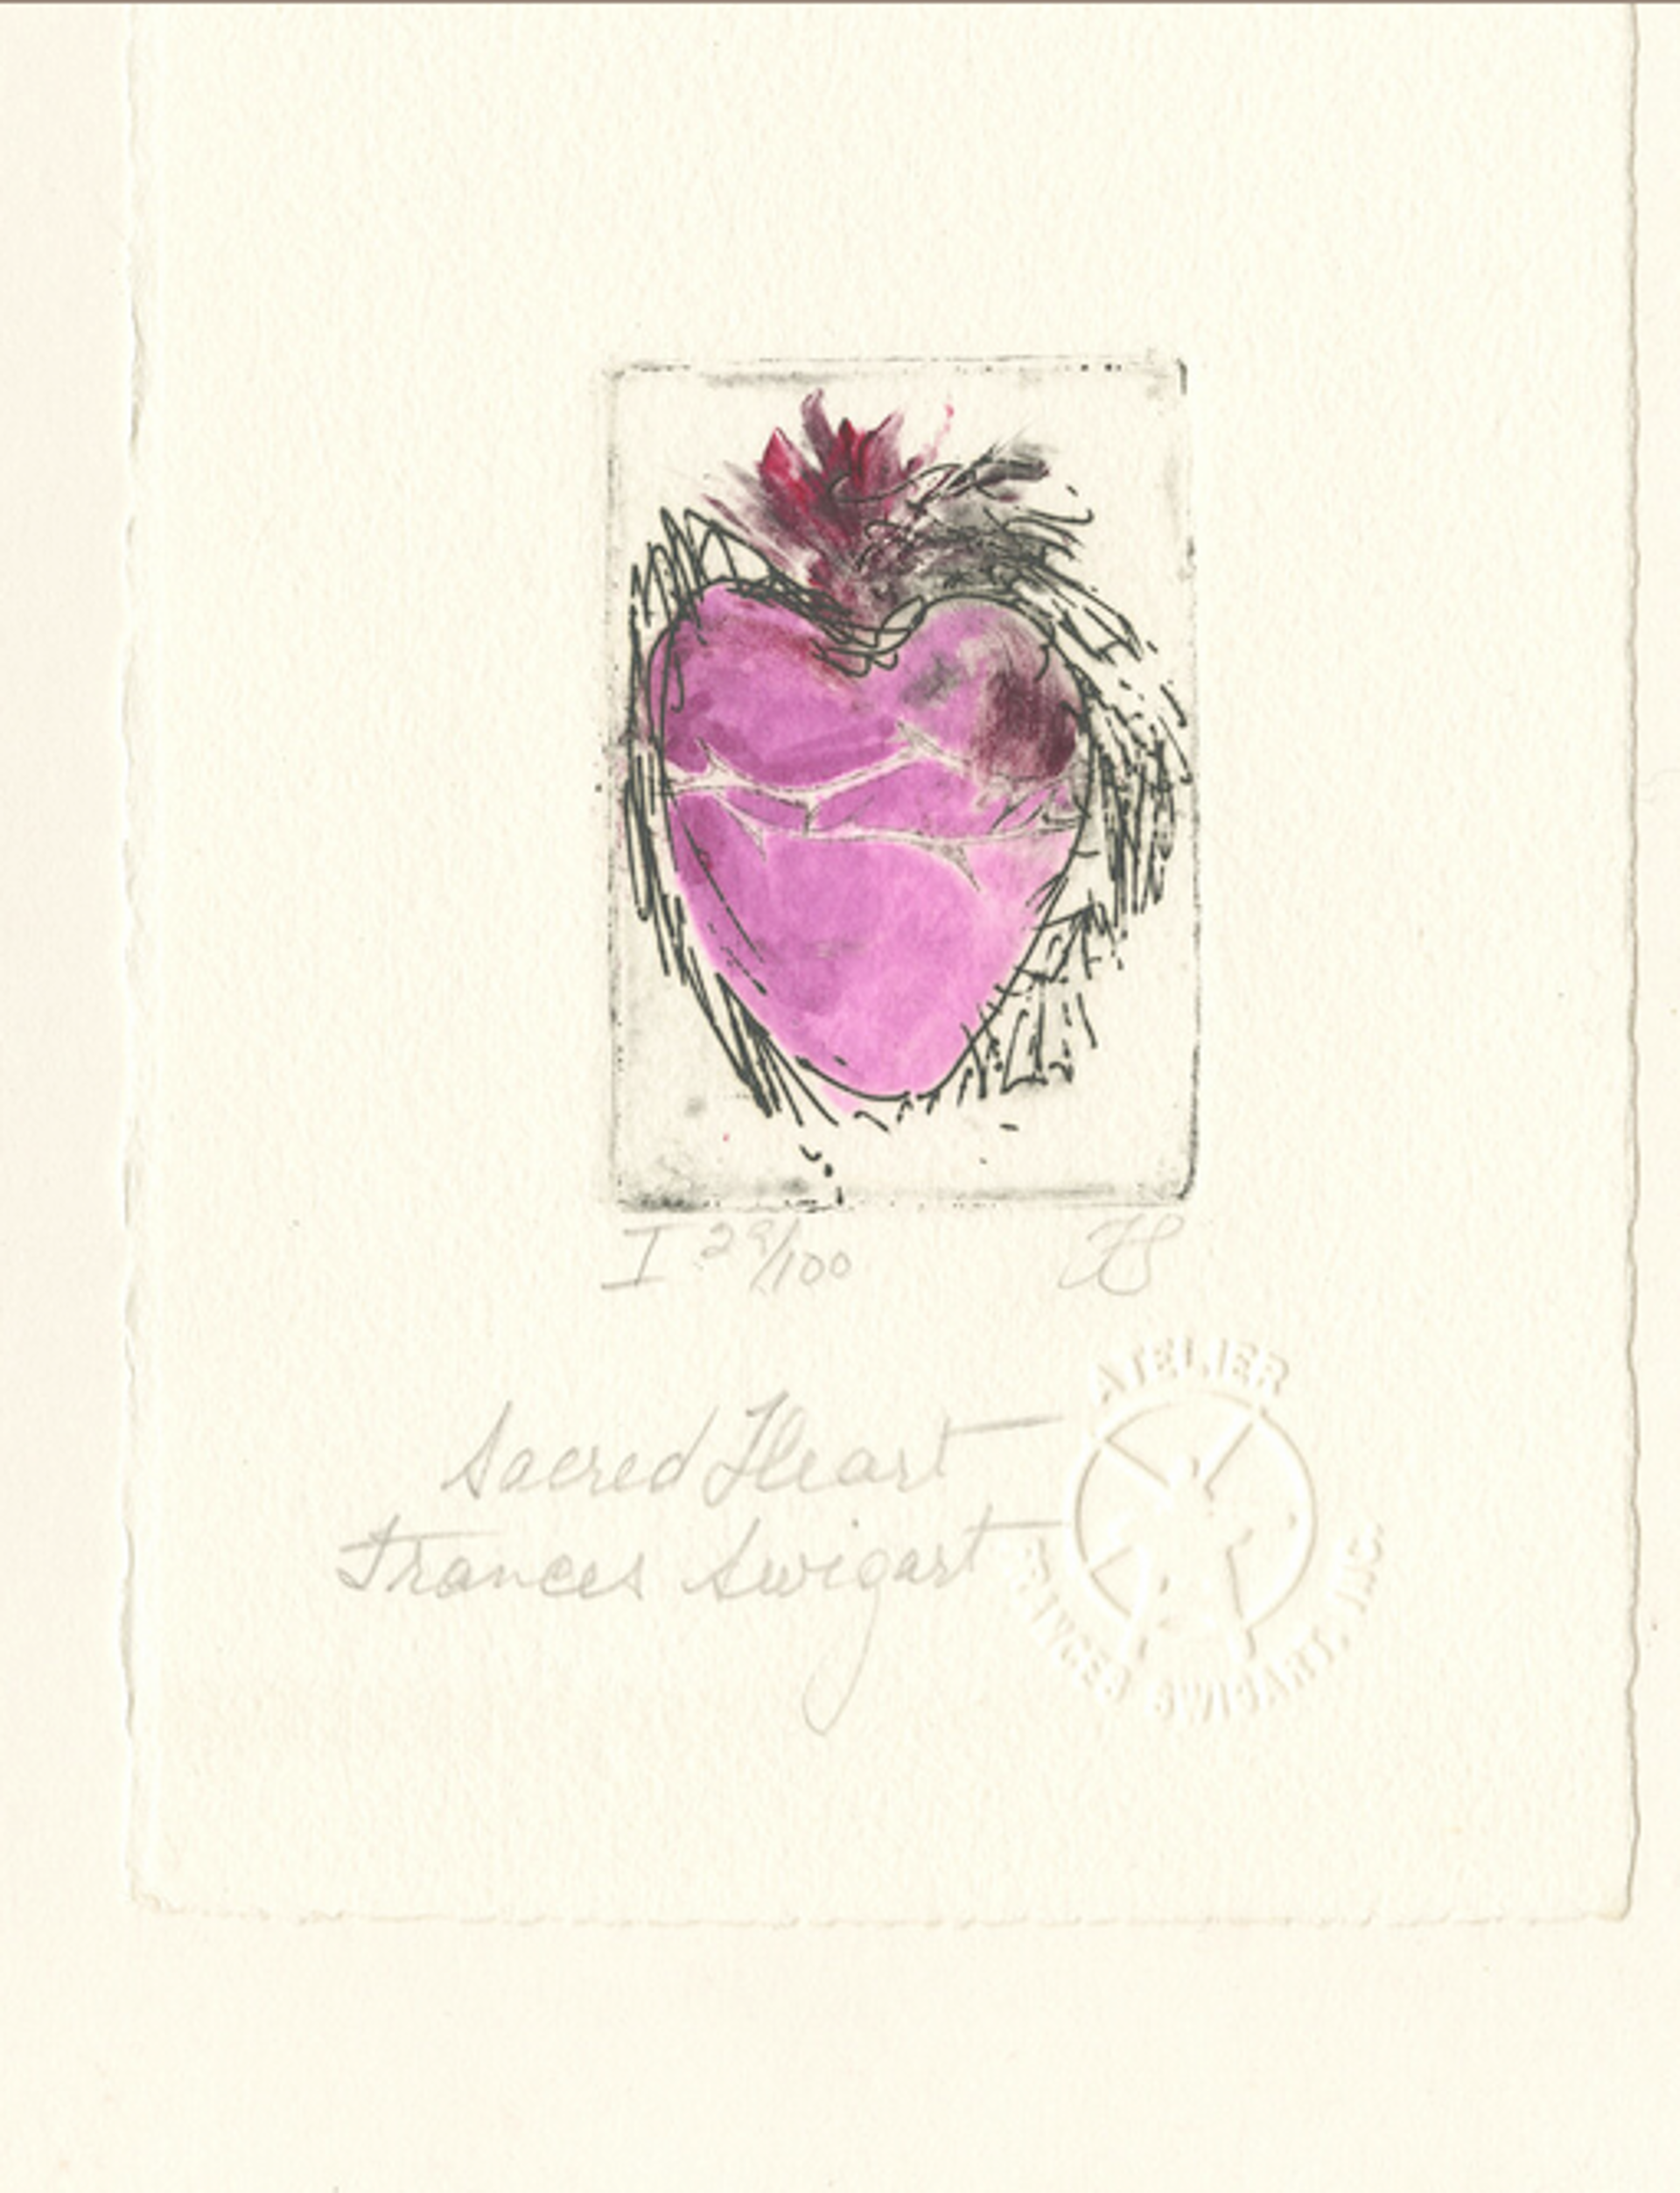 Heart Series, Sacred Heart by Frances Swigart